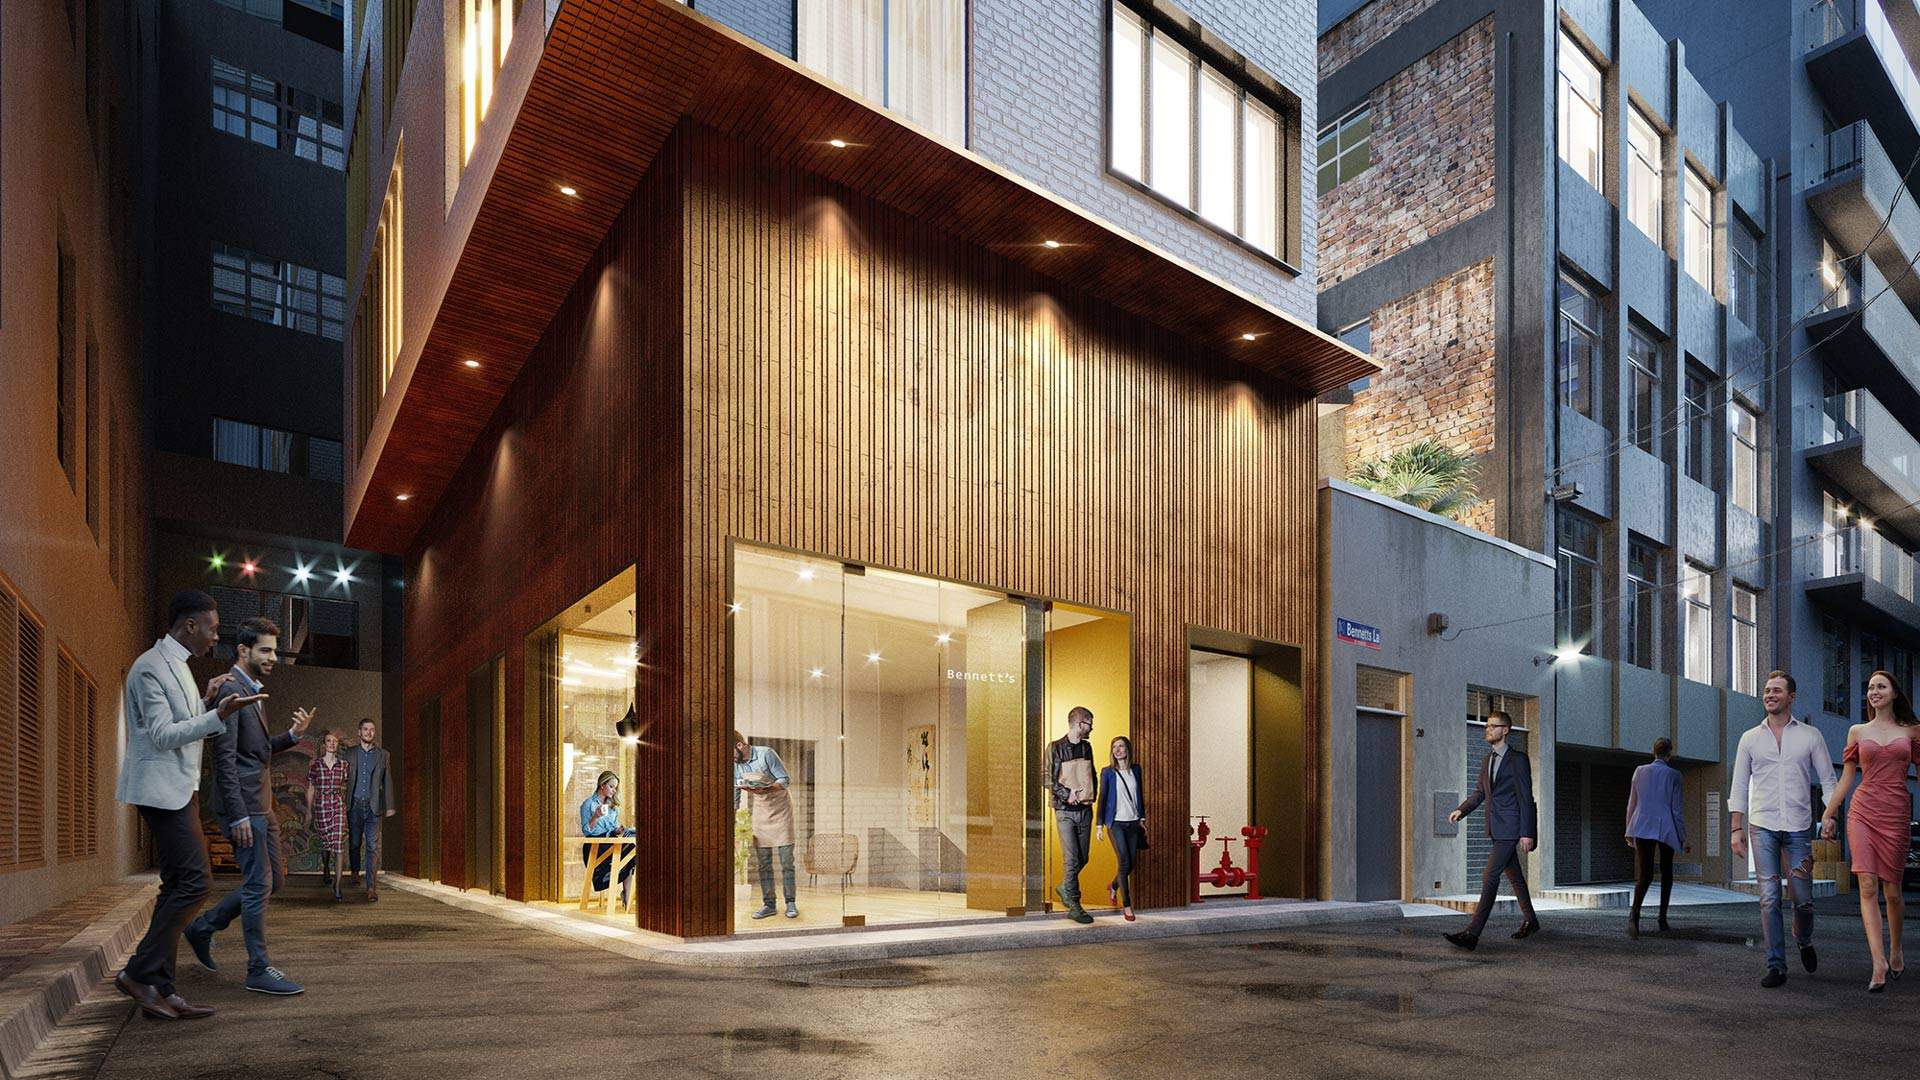 Bennetts Lane Will Soon Be Home to a Jazz Era-Inspired Boutique Hotel